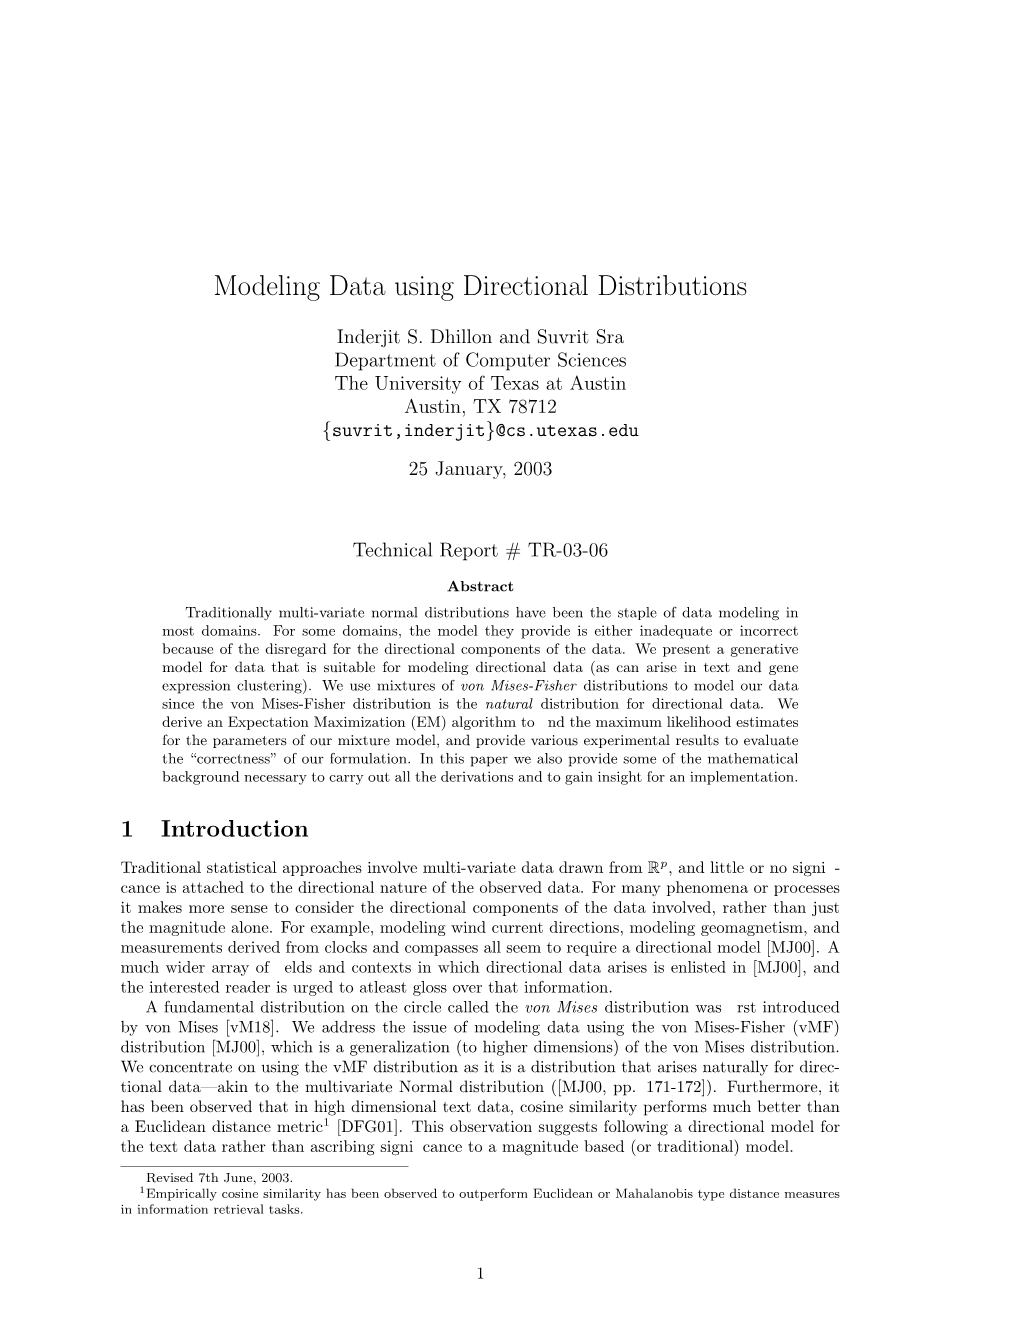 Modeling Data Using Directional Distributions